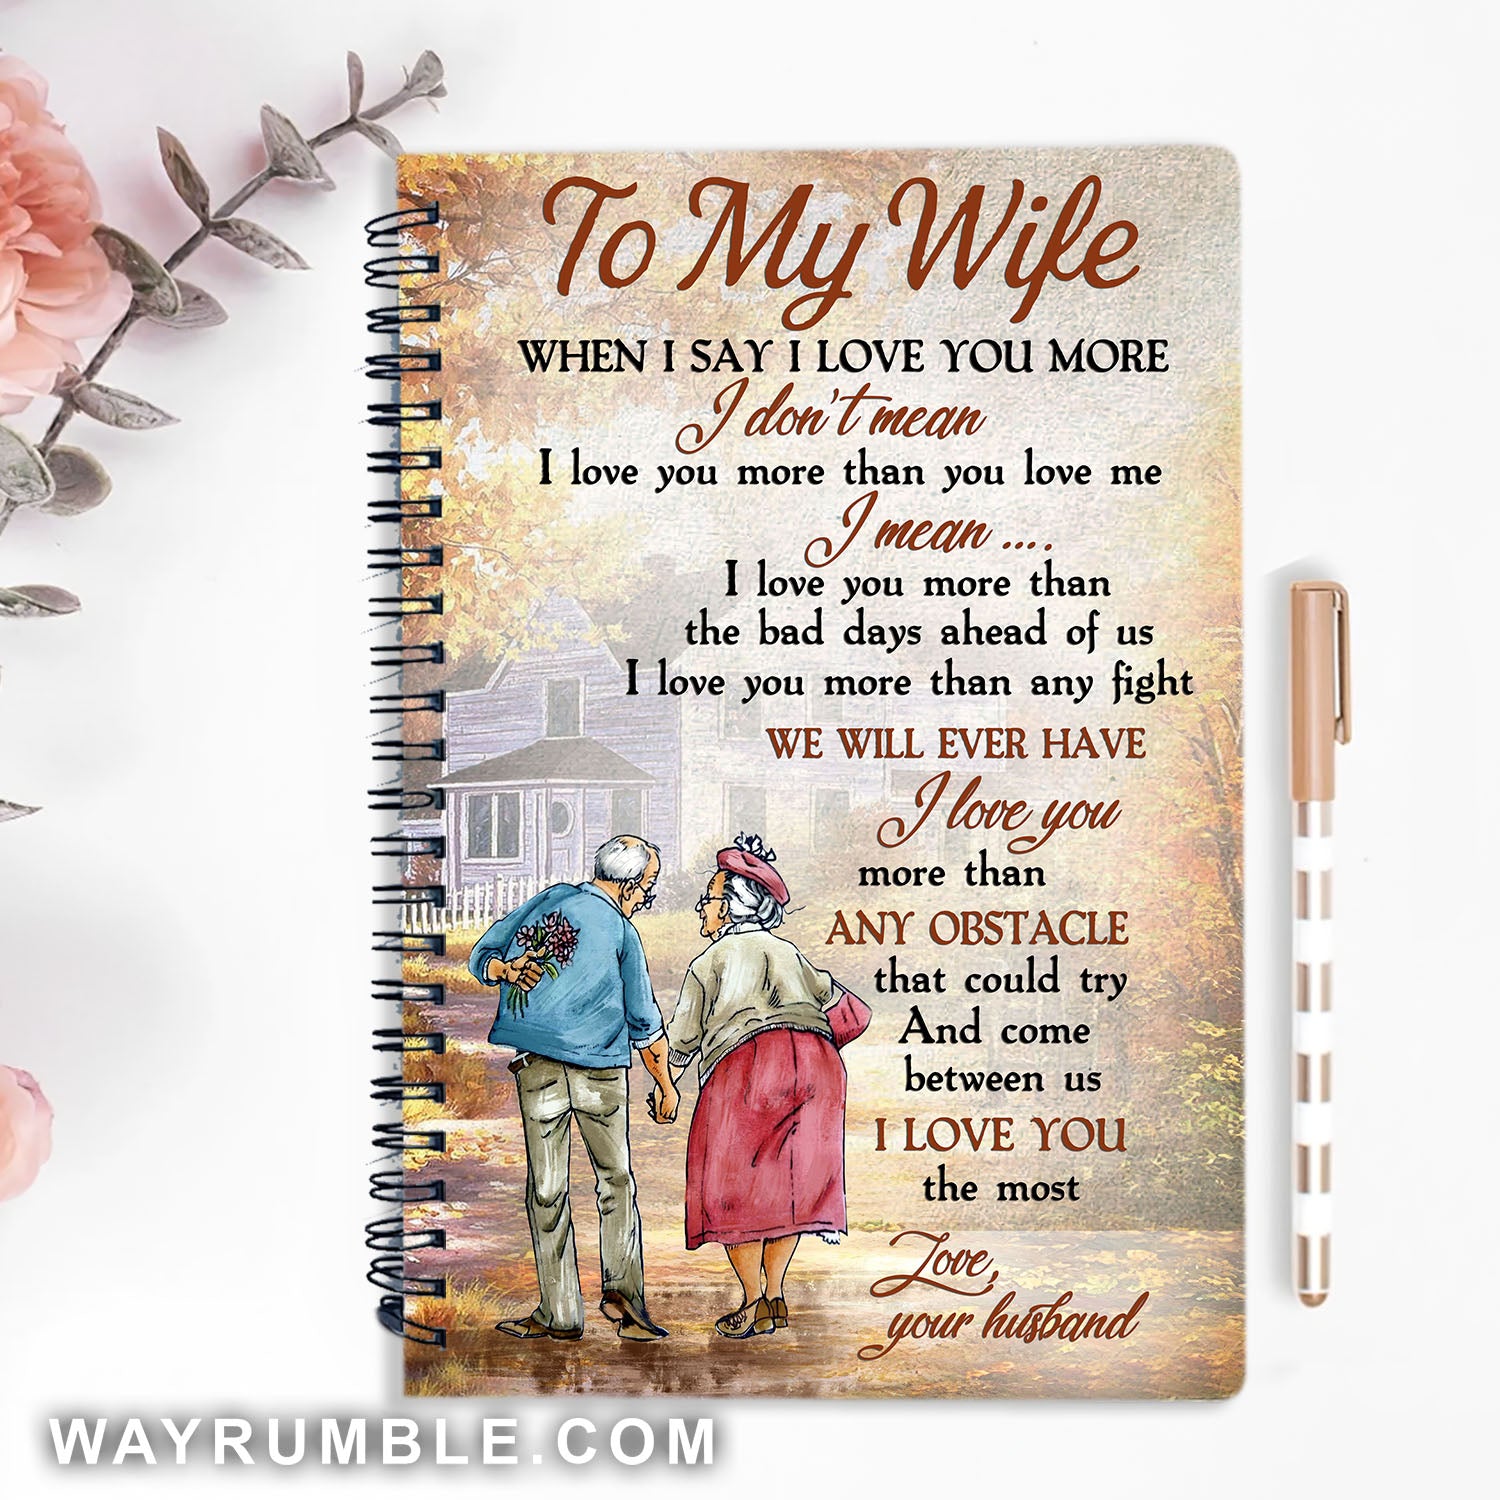 To my wife, Old couple in love, Garden house, I love you the most - Couple Spiral Journal